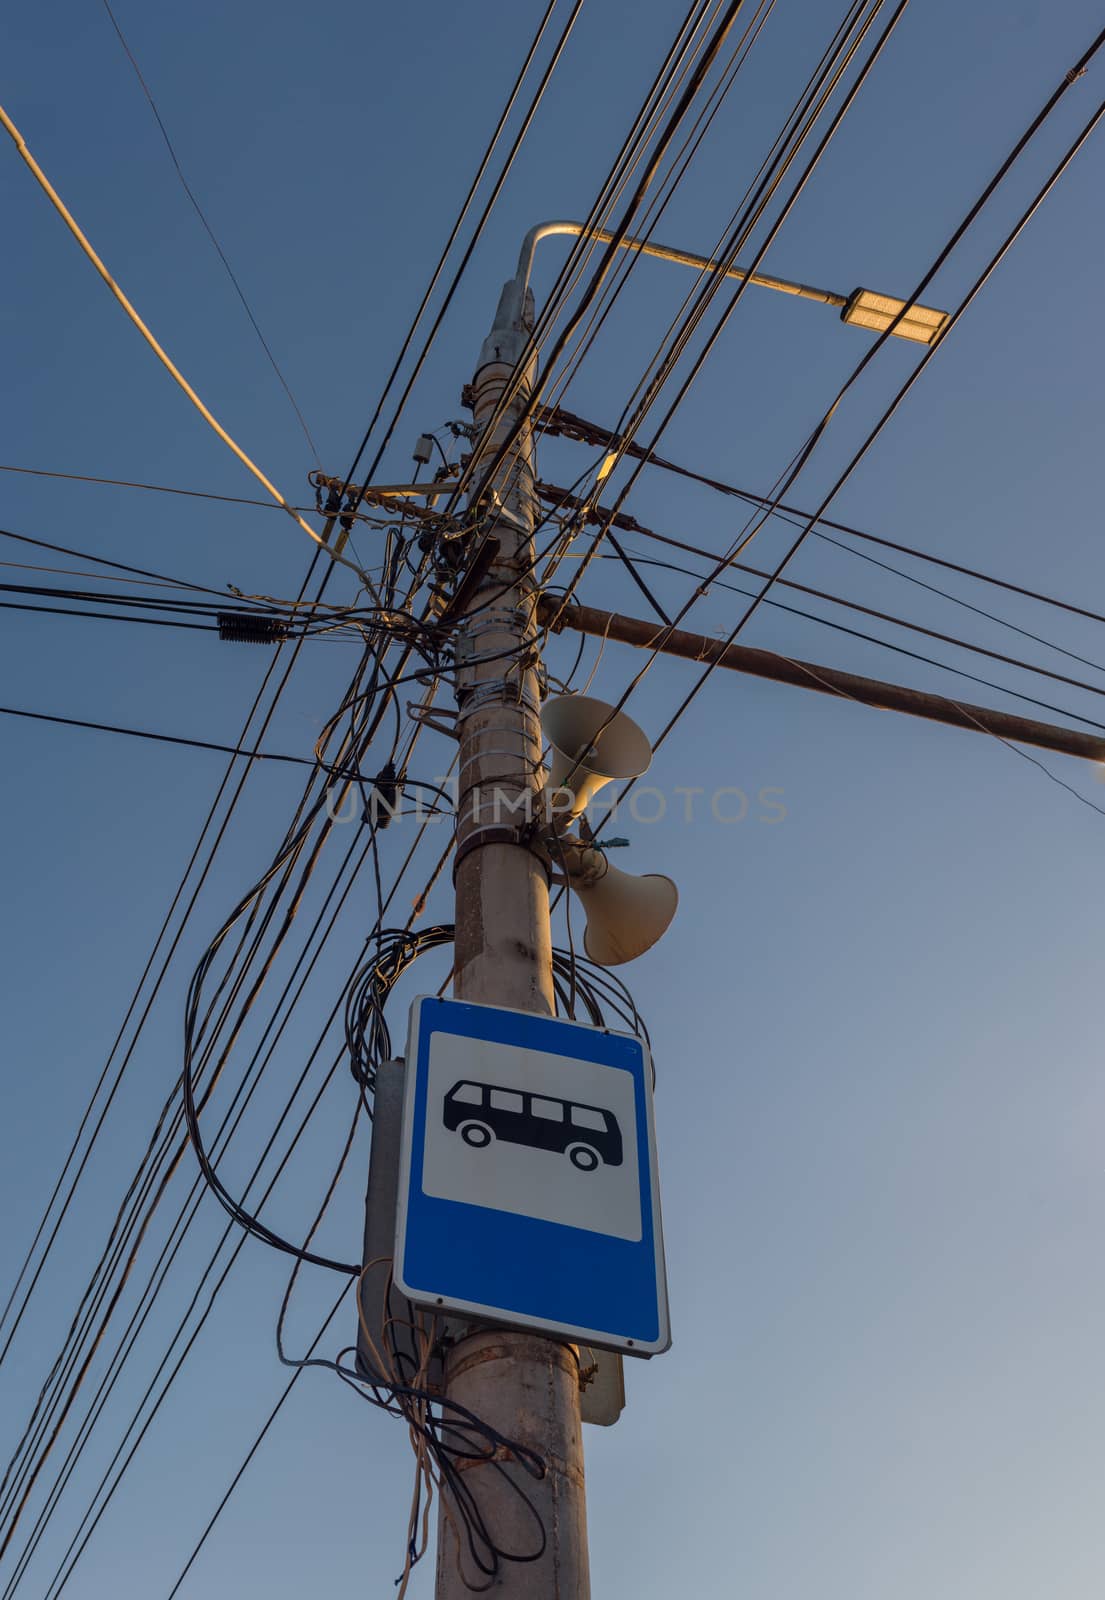 Russian lamp post with a lot of wires, loudspeaker and bus stop sign on blue sky background